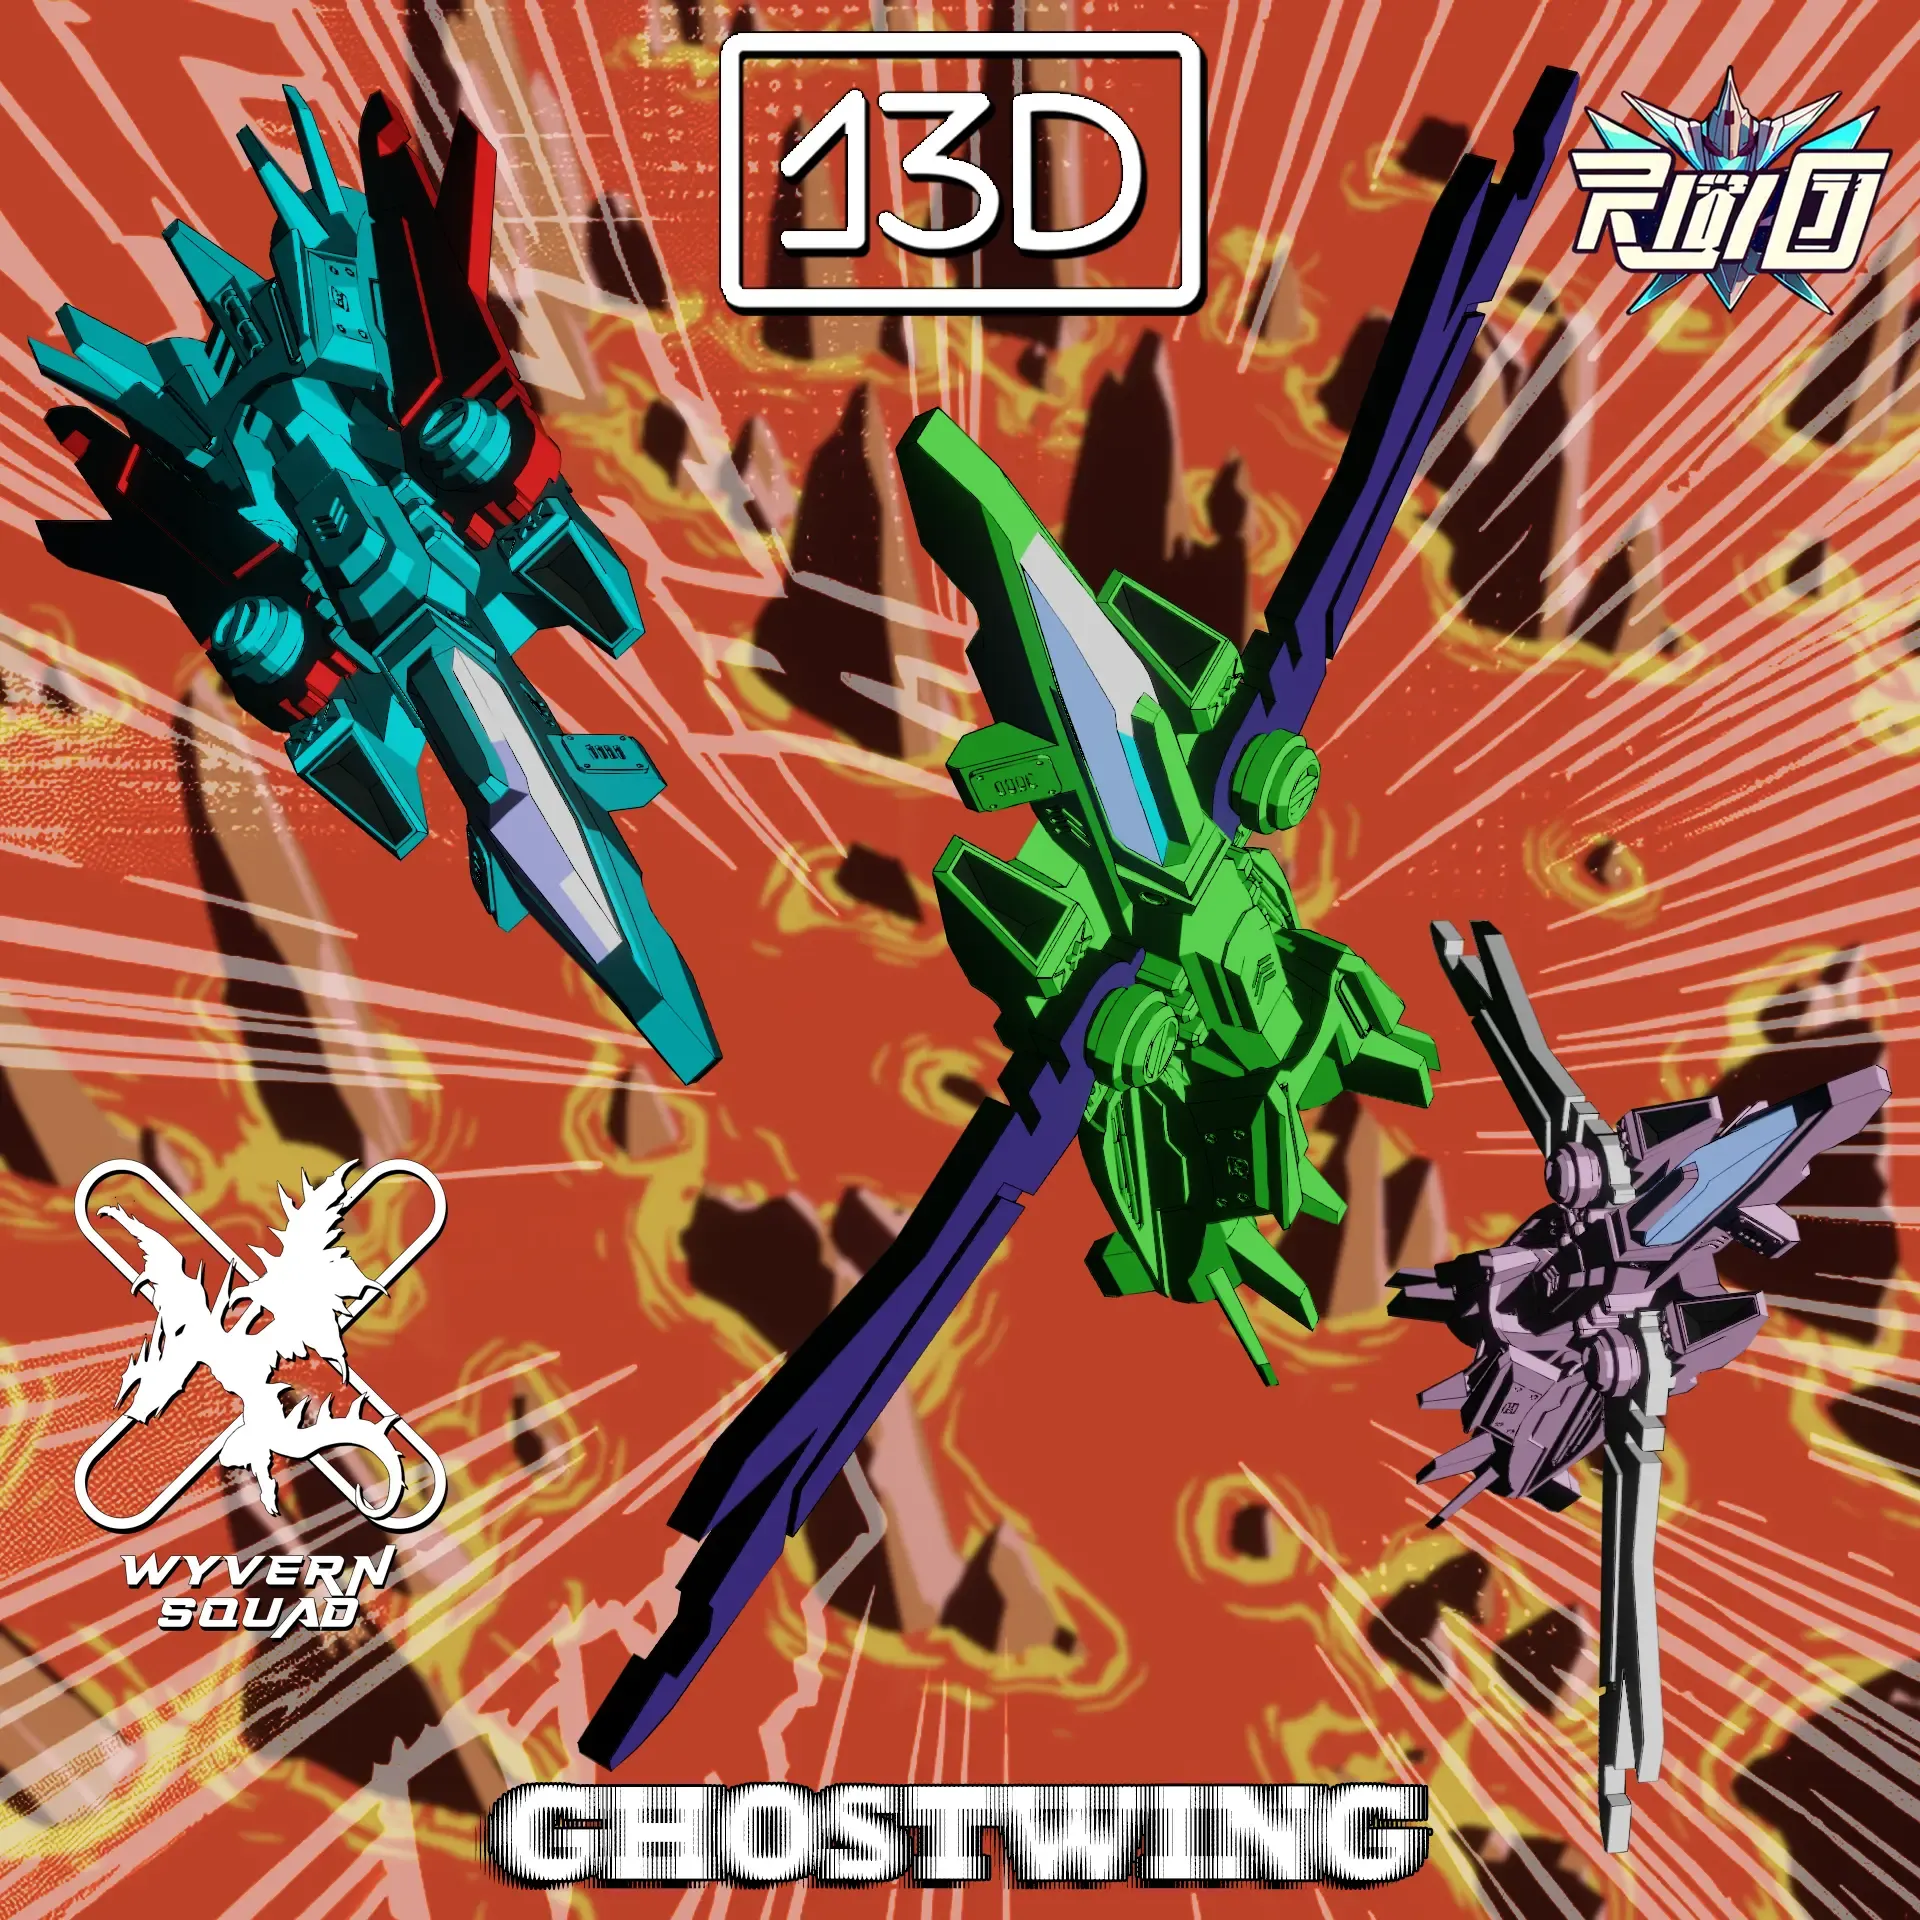 Ghostwing, stealth aircraft